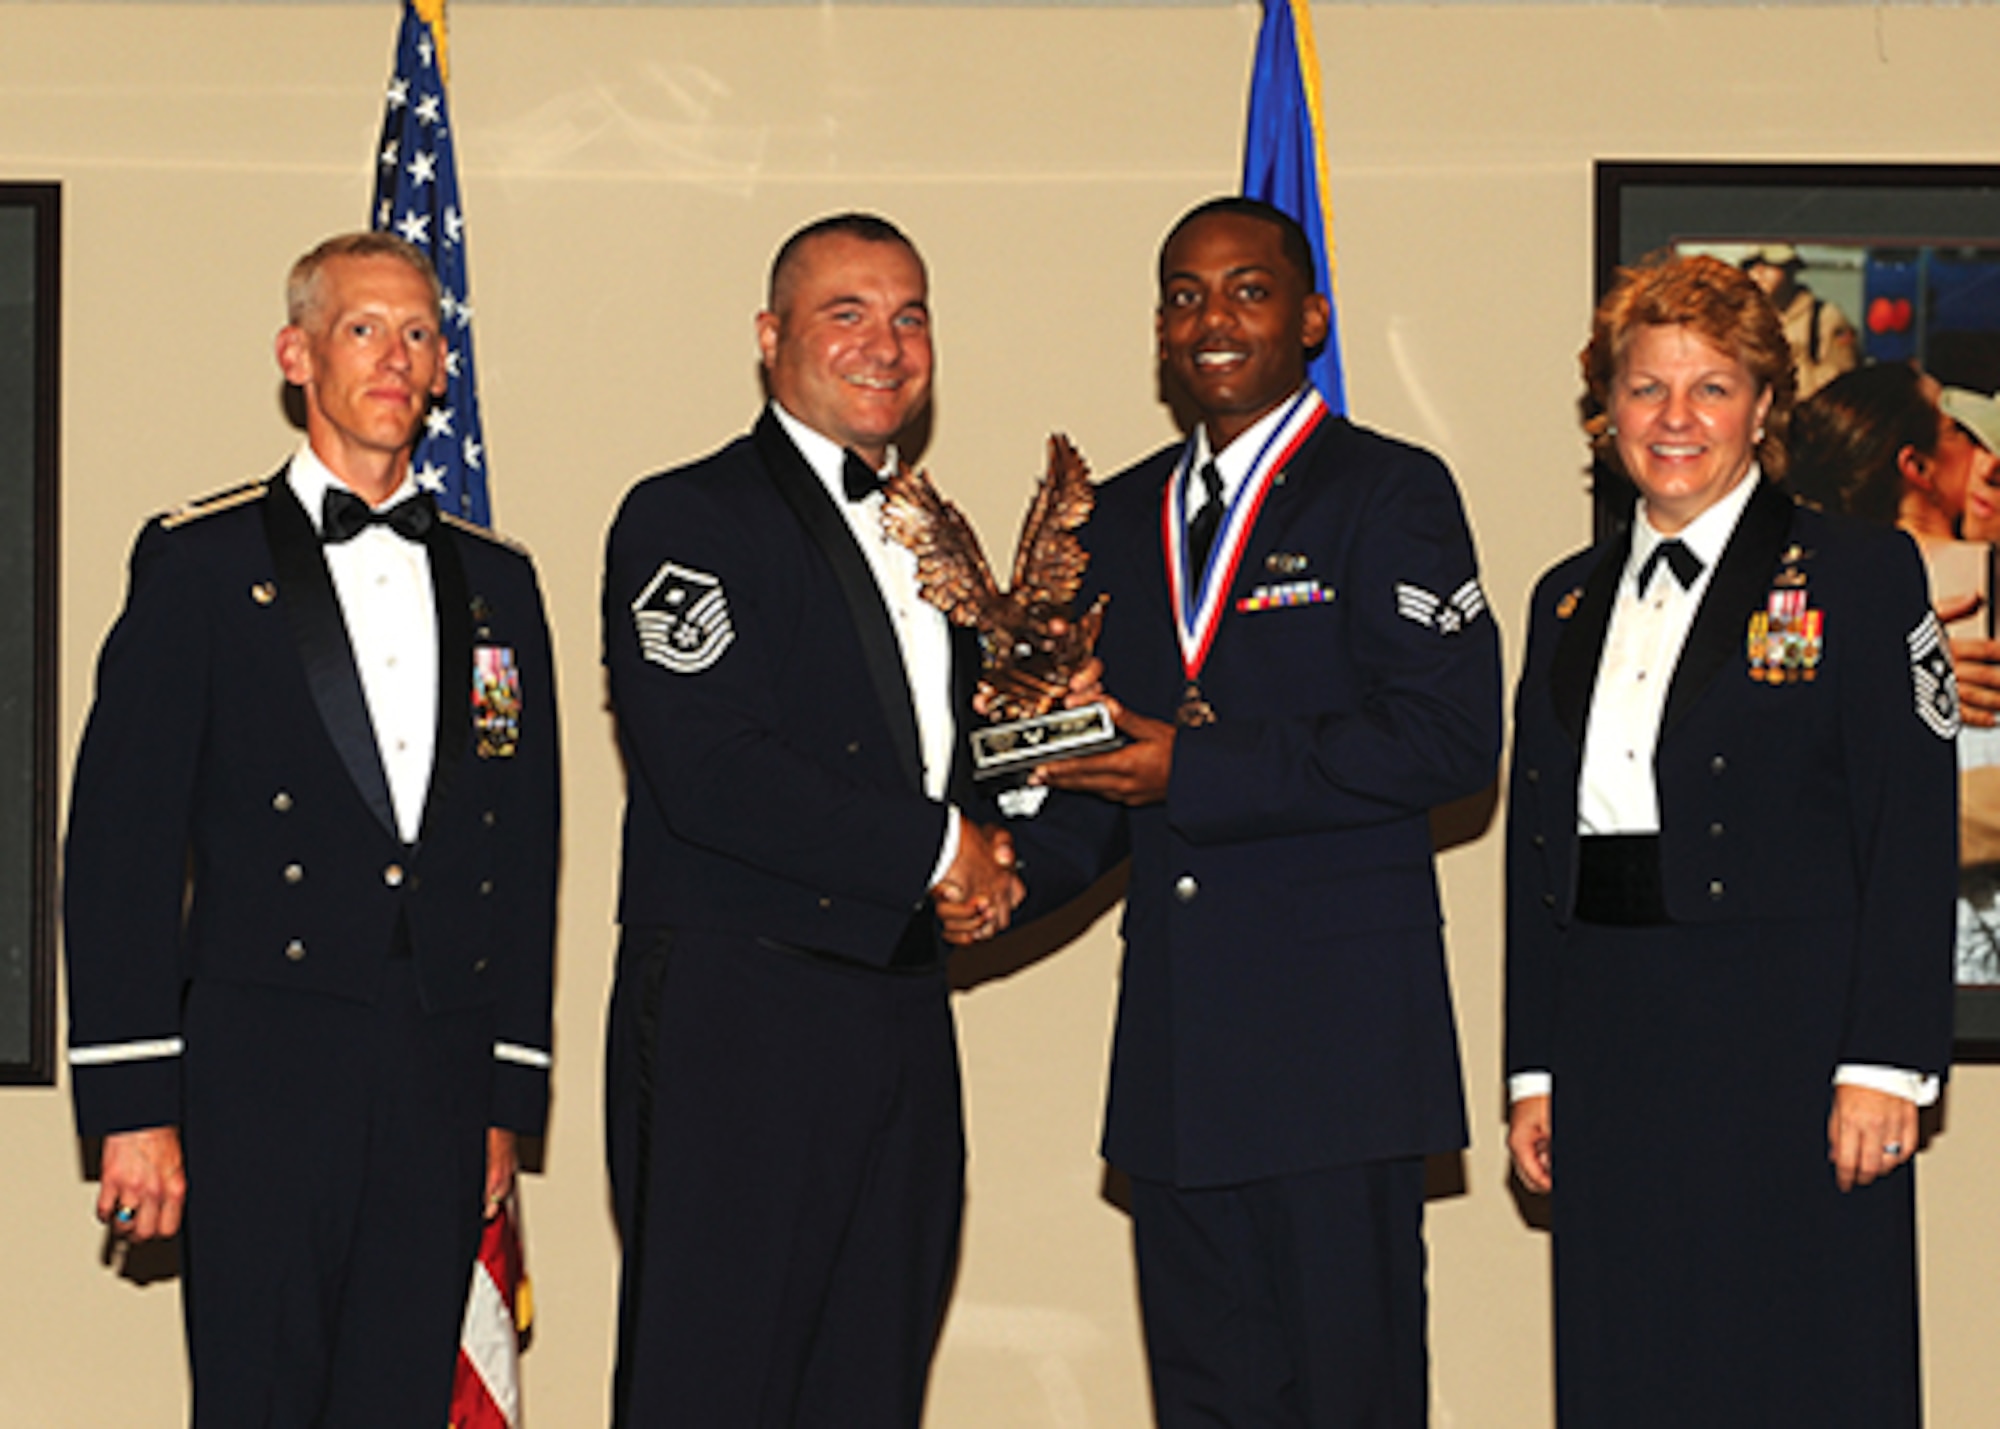 Col. Christopher Bennett (far left), 19th Airlift Wing Vice Commander, along with Chief Master Sgt. Rhonda Buening (far right), 19th AW Command Chief and Master Sgt. Jason Crouse, 19th Security Forces Squadron First Sergeant. (left), congratulate Senior Airman Jamaar Jackson during the graduation ceremony. (Air Force Photo/Senior Airman Scott Poe)